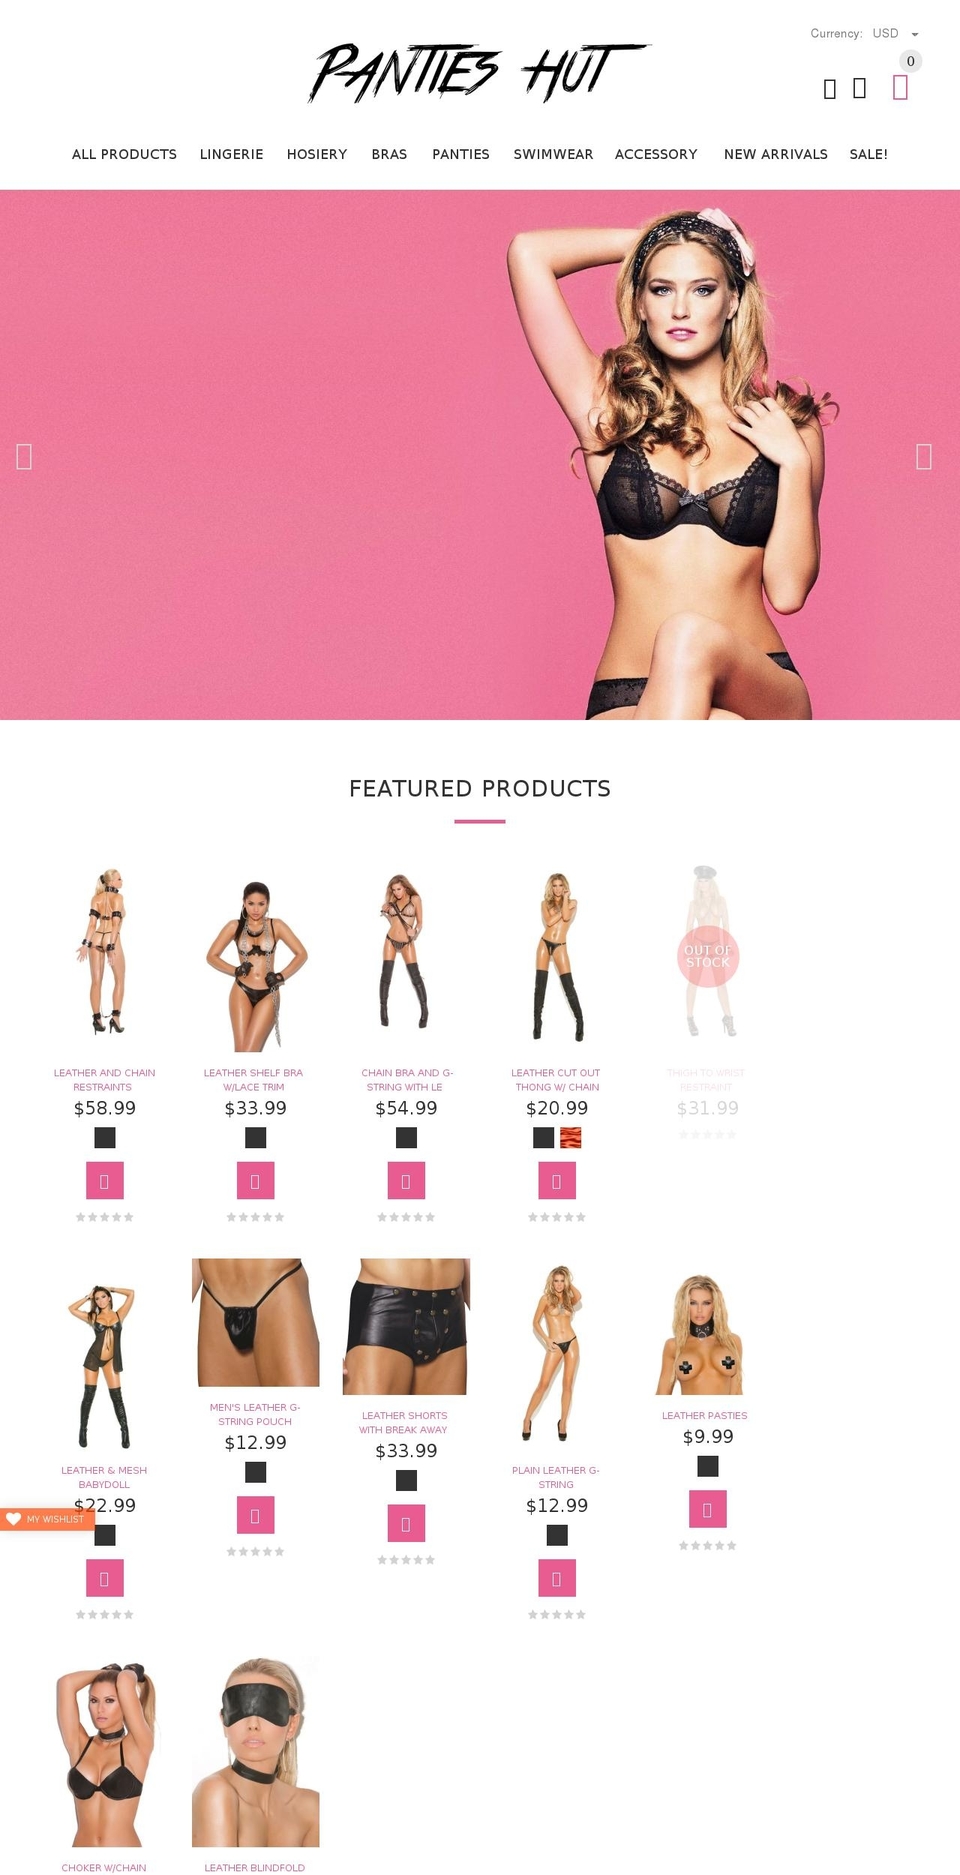 install-me-yourstore-v2-1-9 Shopify theme site example pantieshut.com